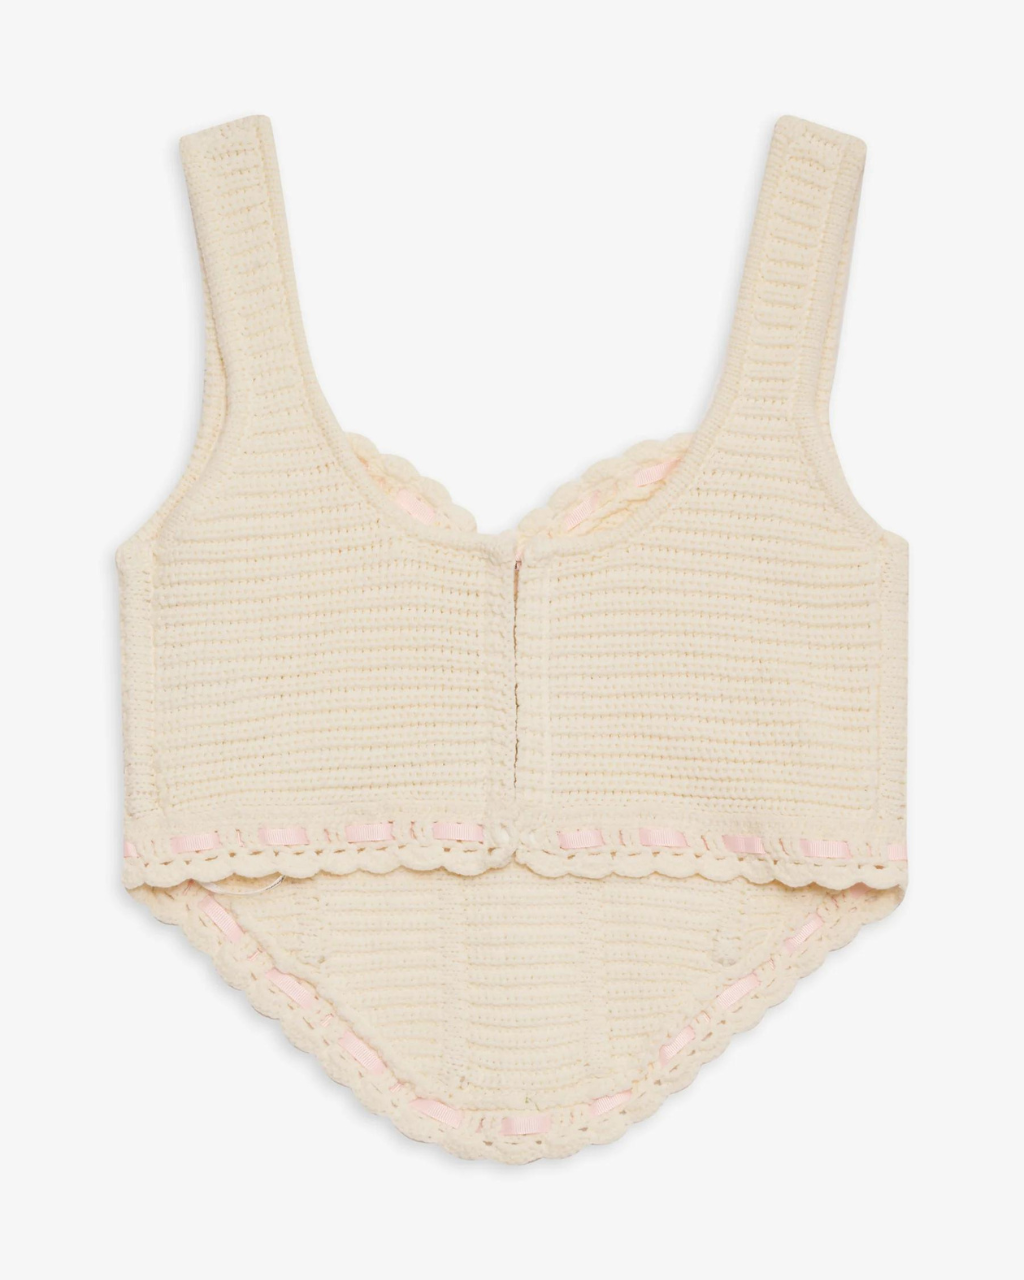 Olina Crochet Top Cream, Tank Blouse by For Love and Lemons | LIT Boutique